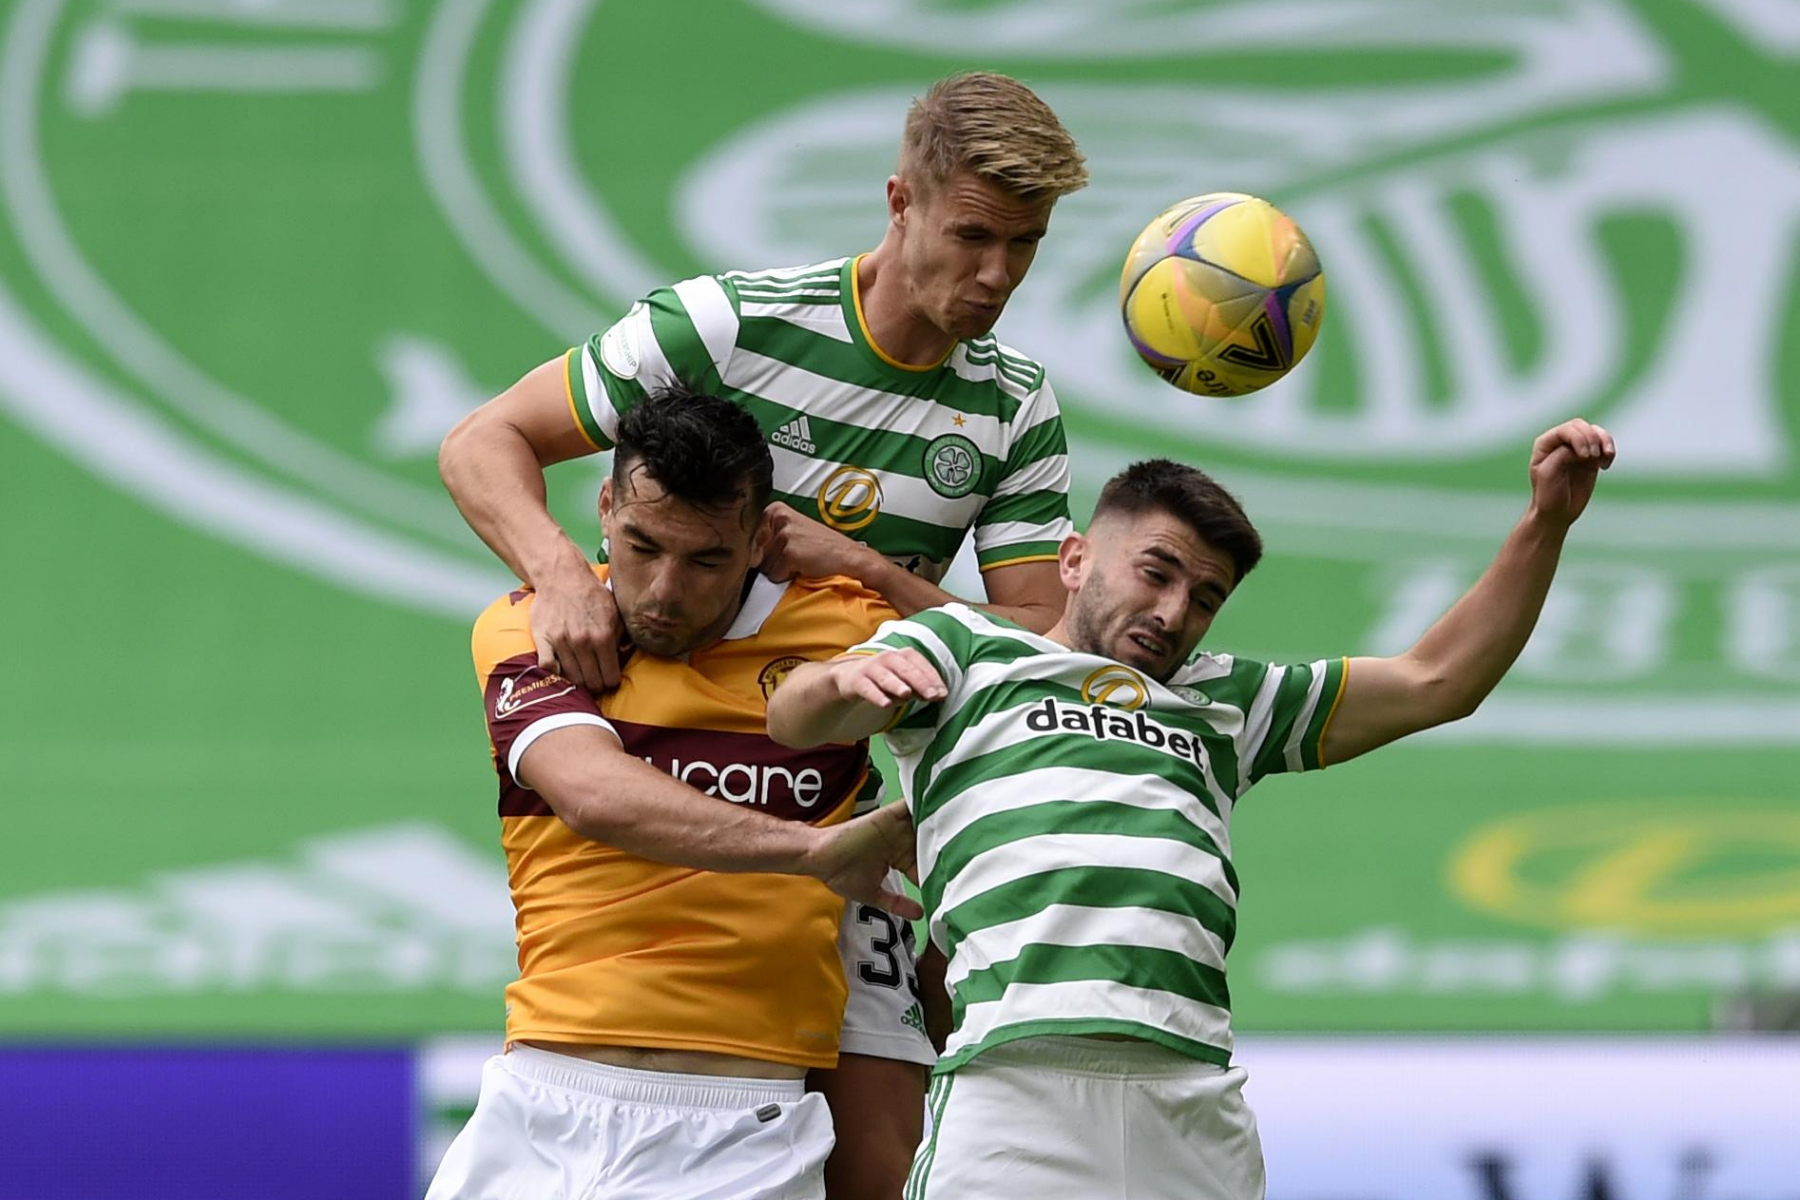 Celtic vs Motherwell LIVE: Goal and match updates from Scottish Premiership clash